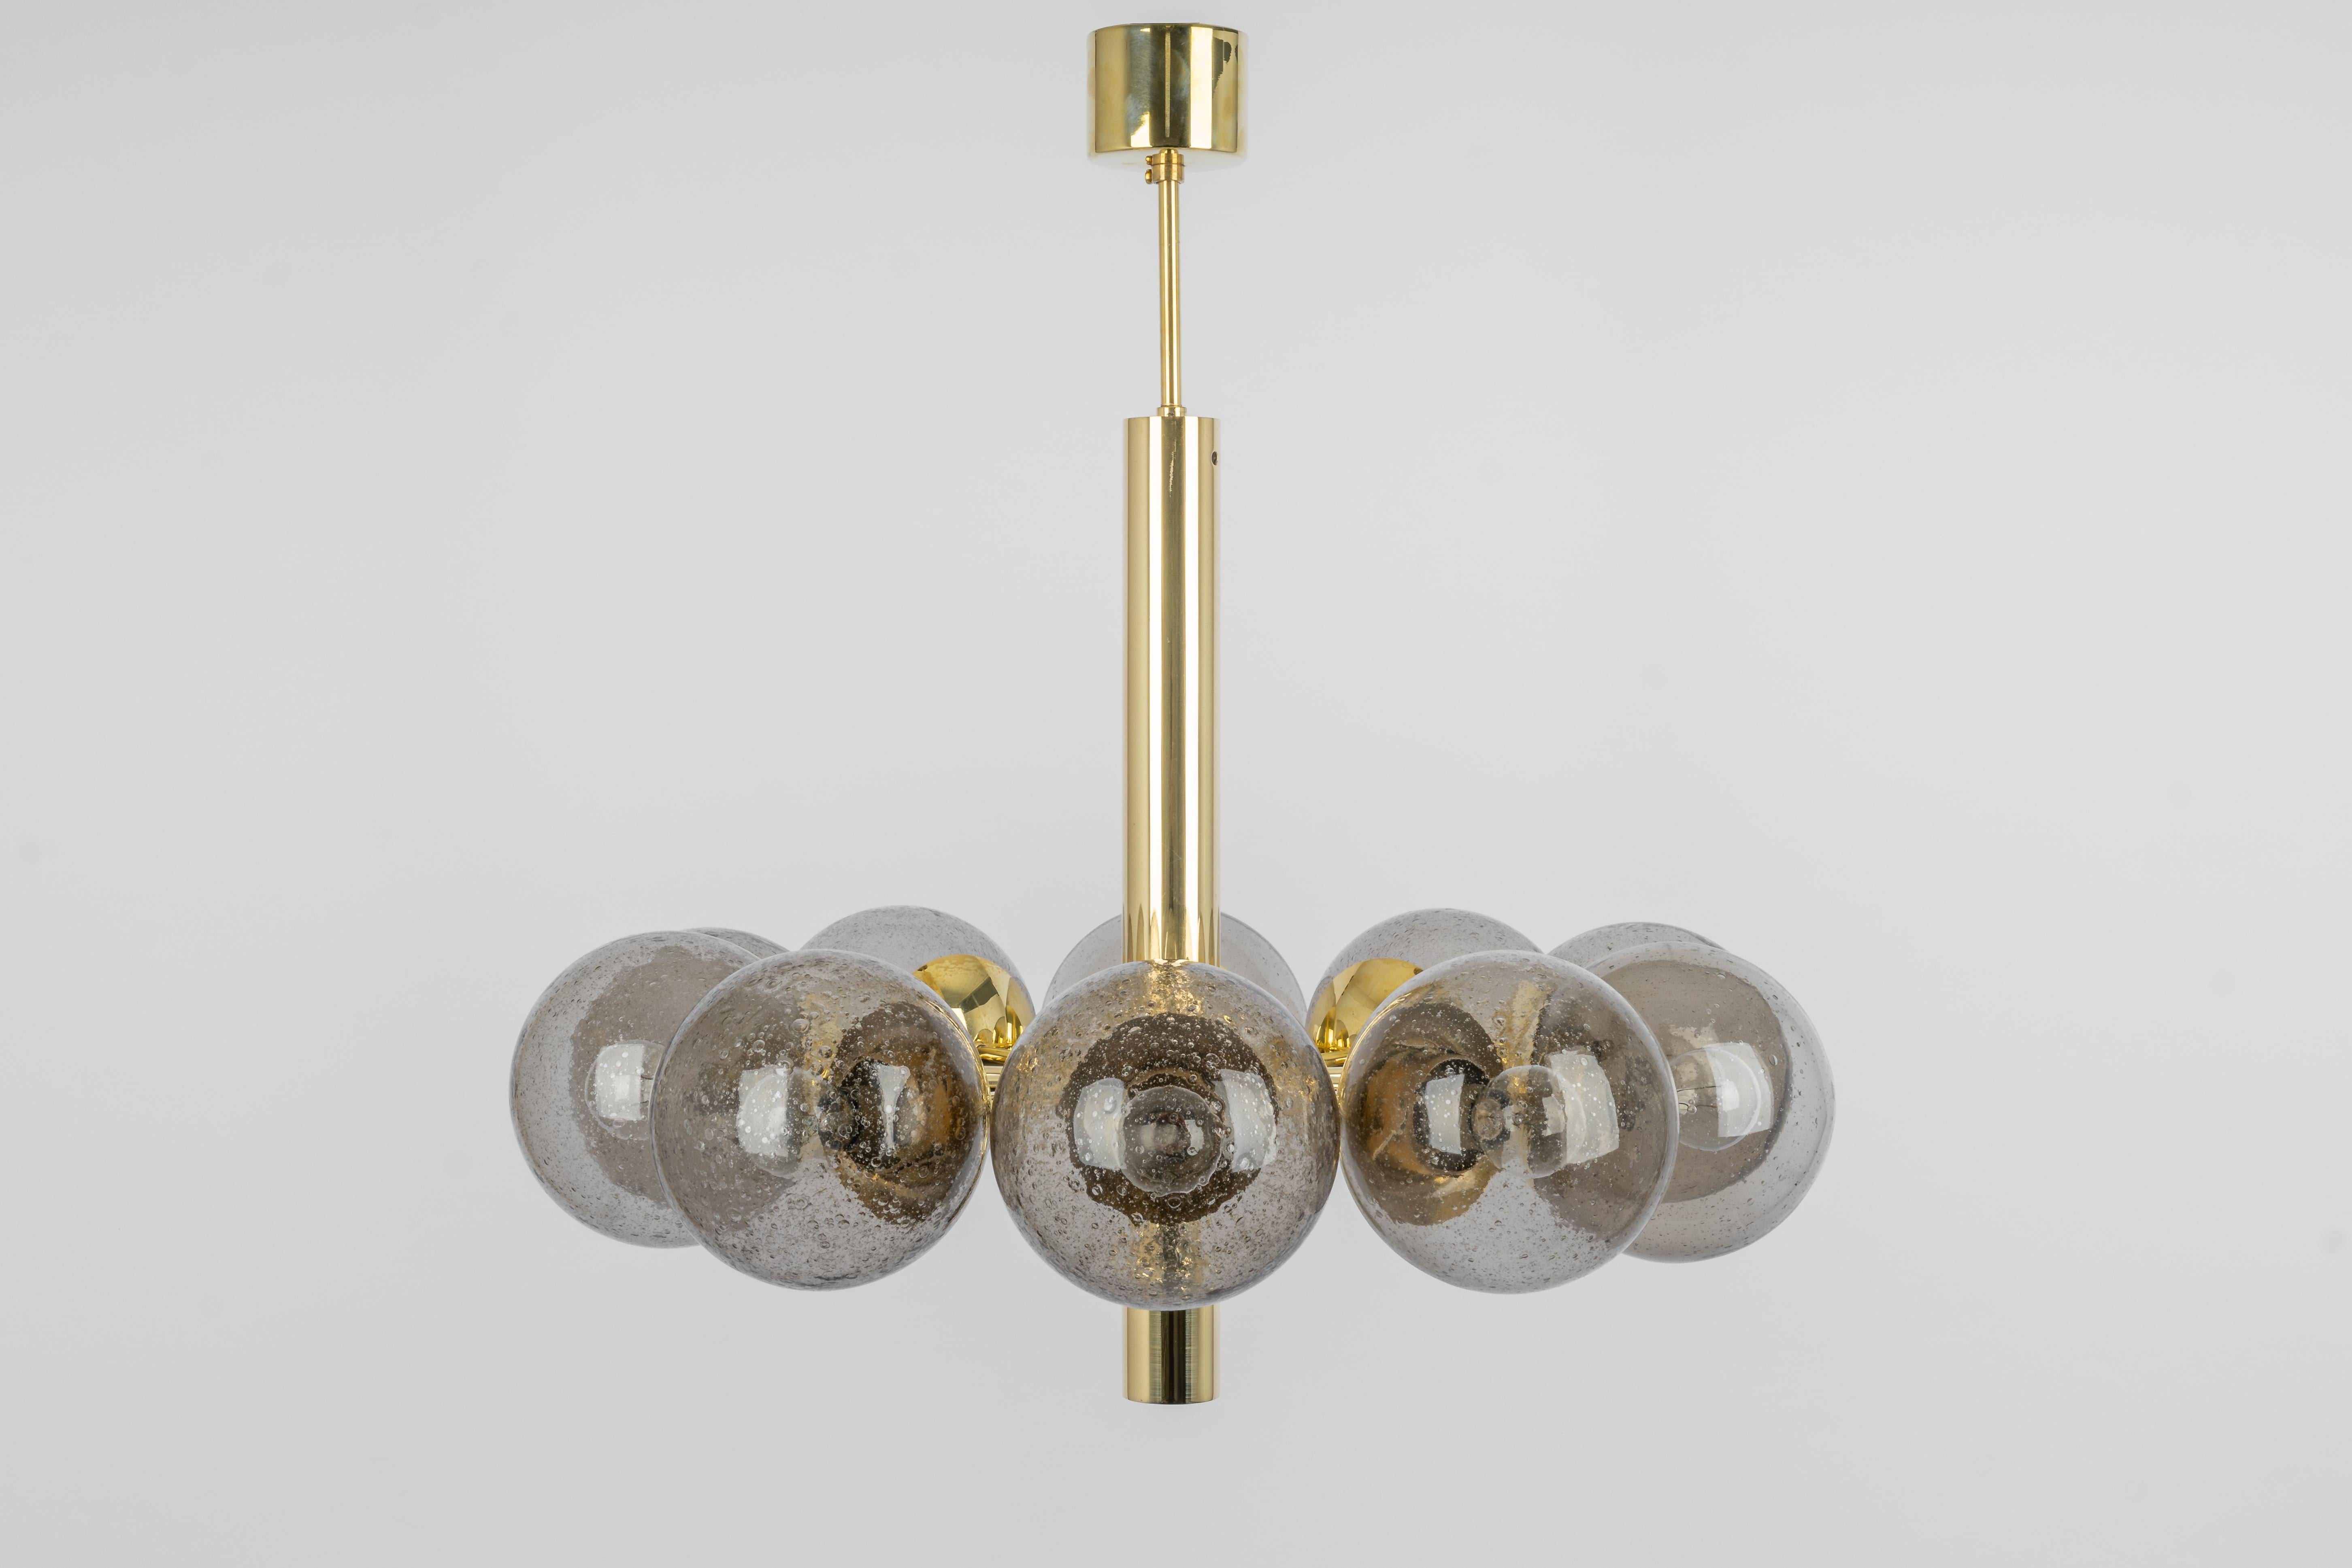 Stunning radial Sputnik brass color chandelier with ten smoked glass globes by Kaiser Leuchten, Germany, 1960s.
High quality and in very good condition. Cleaned, well-wired and ready to use.
The fixture requires 10 x E14 small bulbs with 40W max